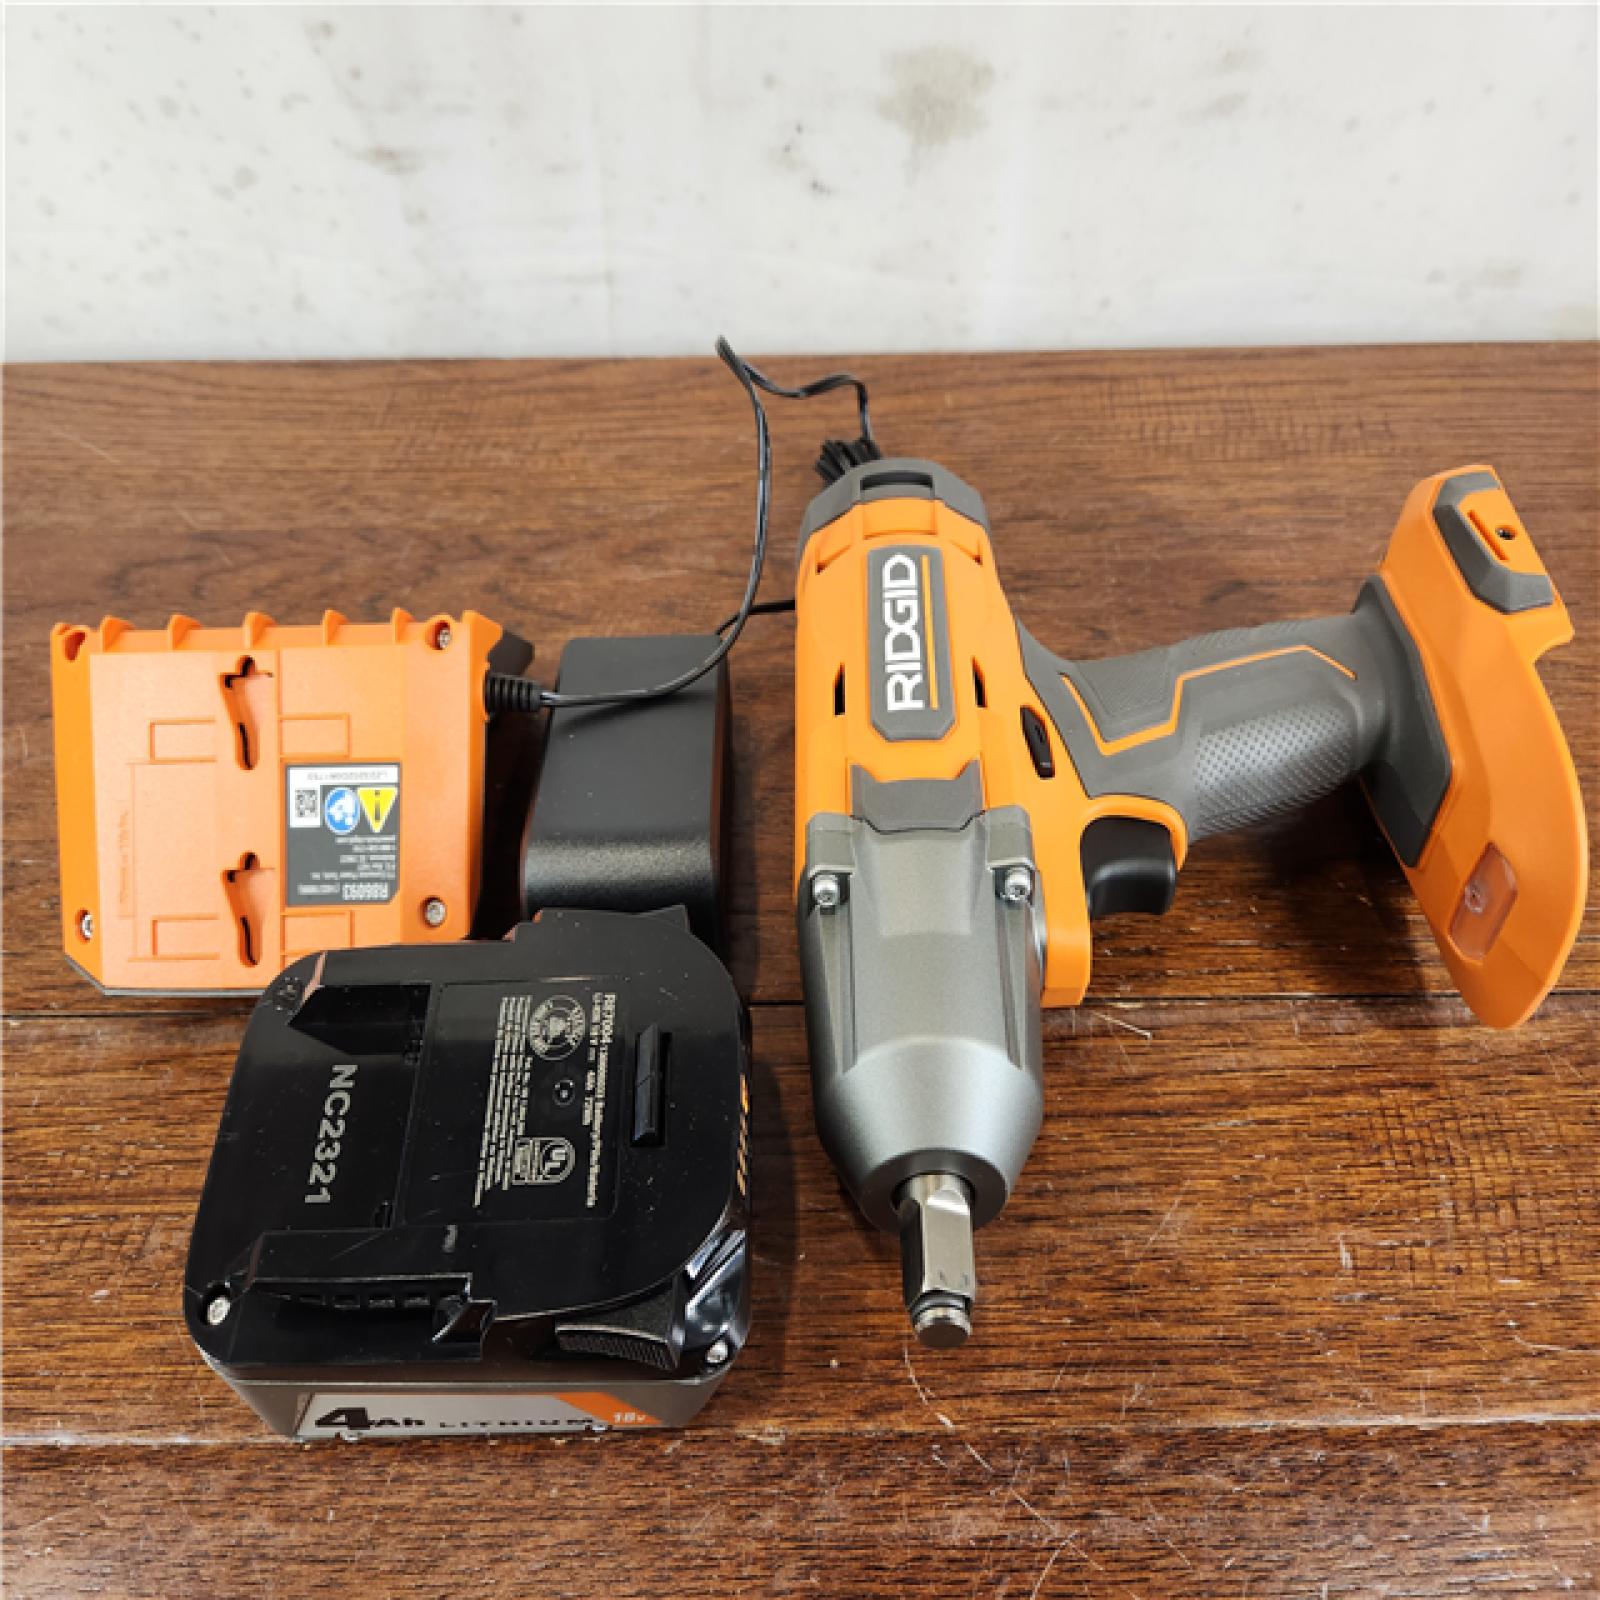 AS-IS RIDGID 18V Cordless 1/2 in. Impact Wrench Kit with 4.0 Ah Battery and Charger